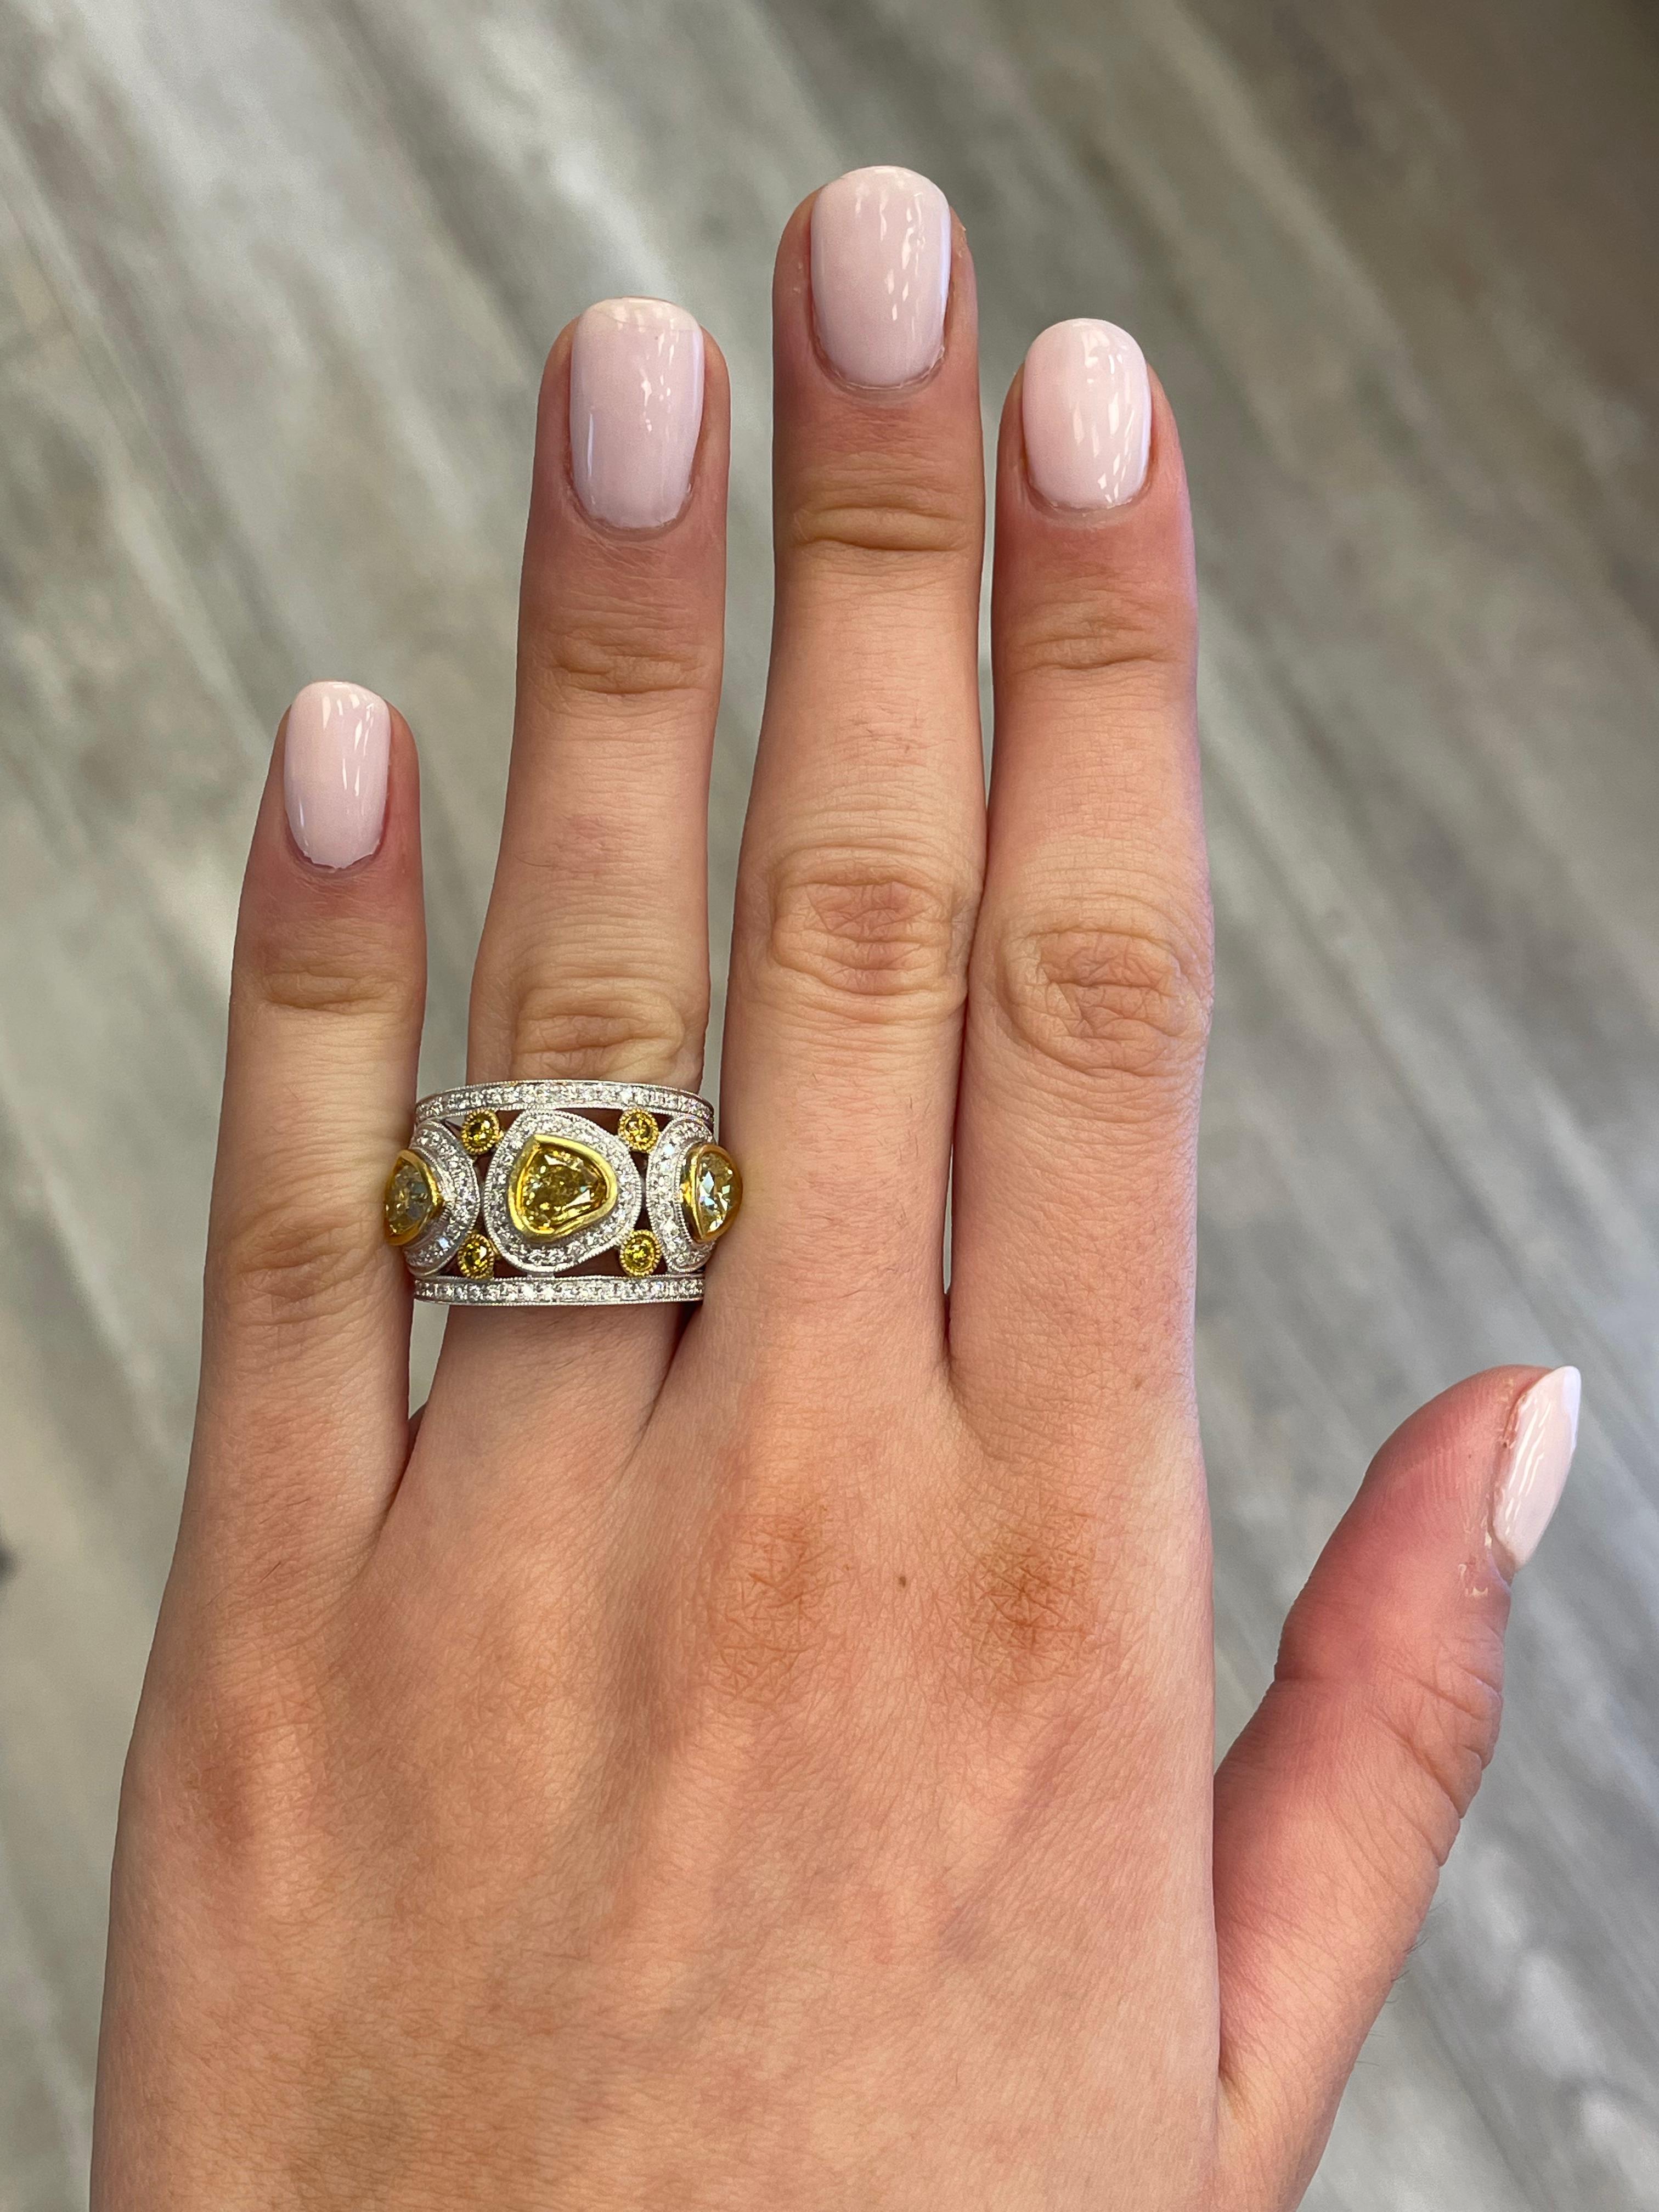 Stunning 3 yellow diamonds bezel set ring with two rows of round diamonds and millgrain, EGL certified. By Alexander Beverly Hills. 
2.58 carats total diamond weight.
Center heart shape diamonds approximately fancy intense brownish yellow. 2